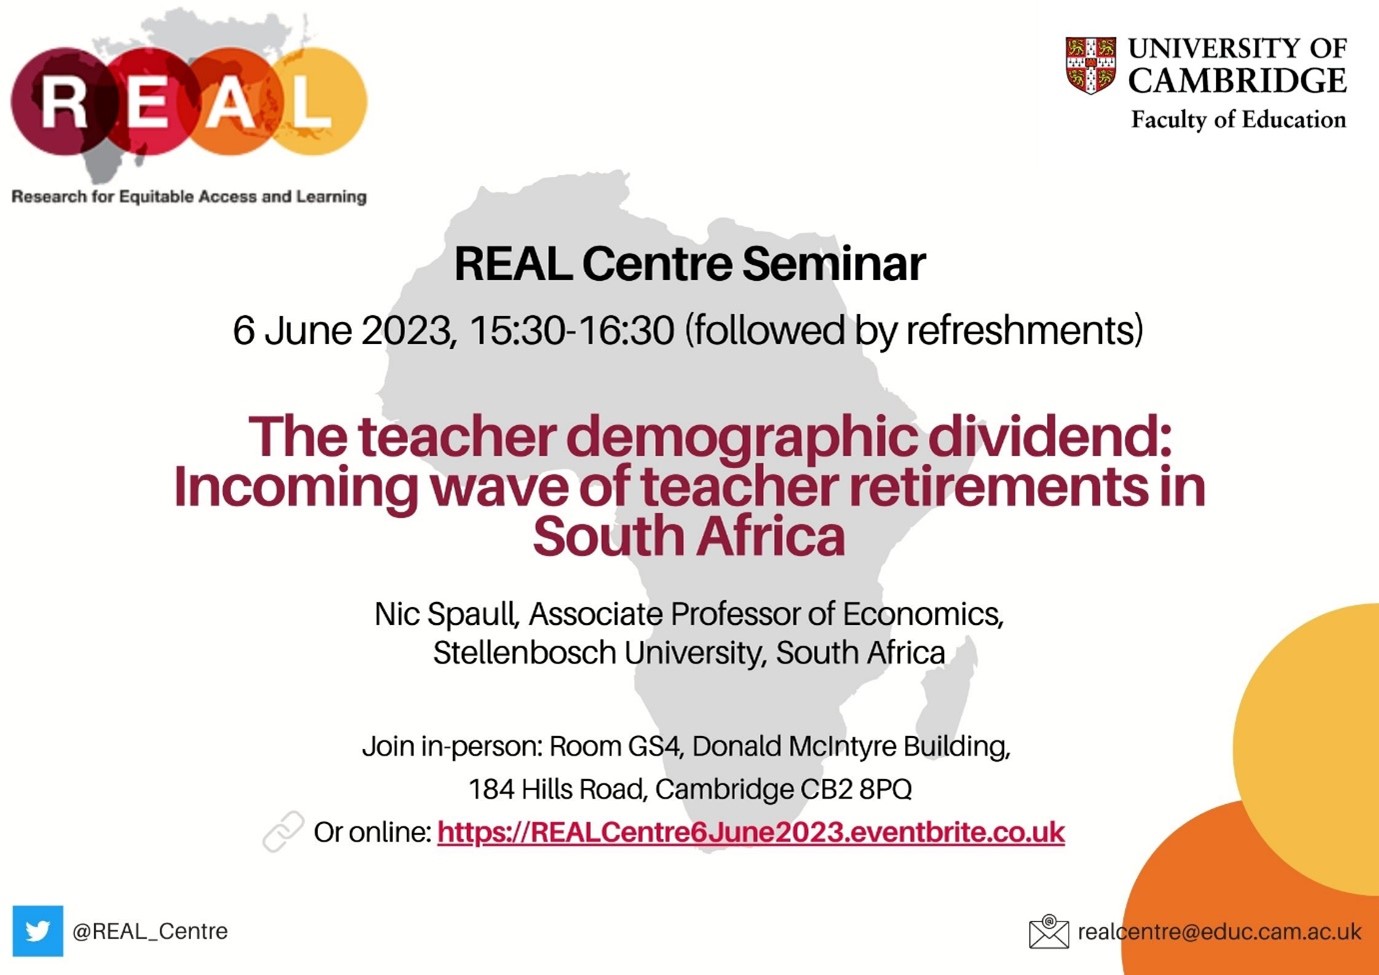 The teacher demographic dividend: Incoming wave of teacher retirements in South Africa